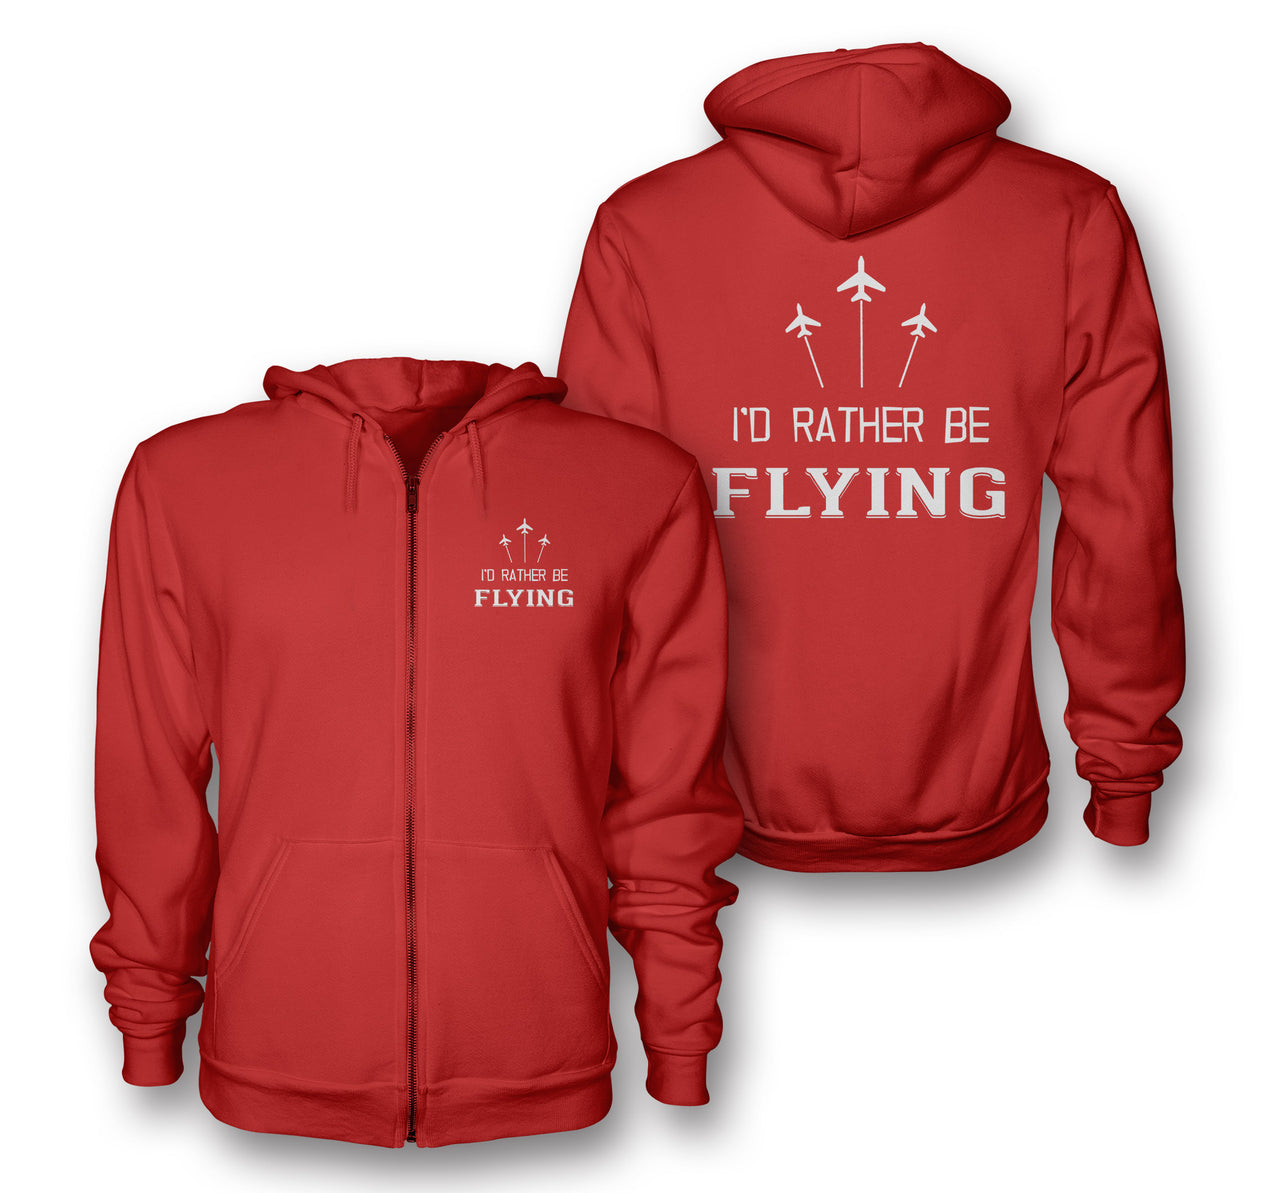 I'D Rather Be Flying Designed Zipped Hoodies